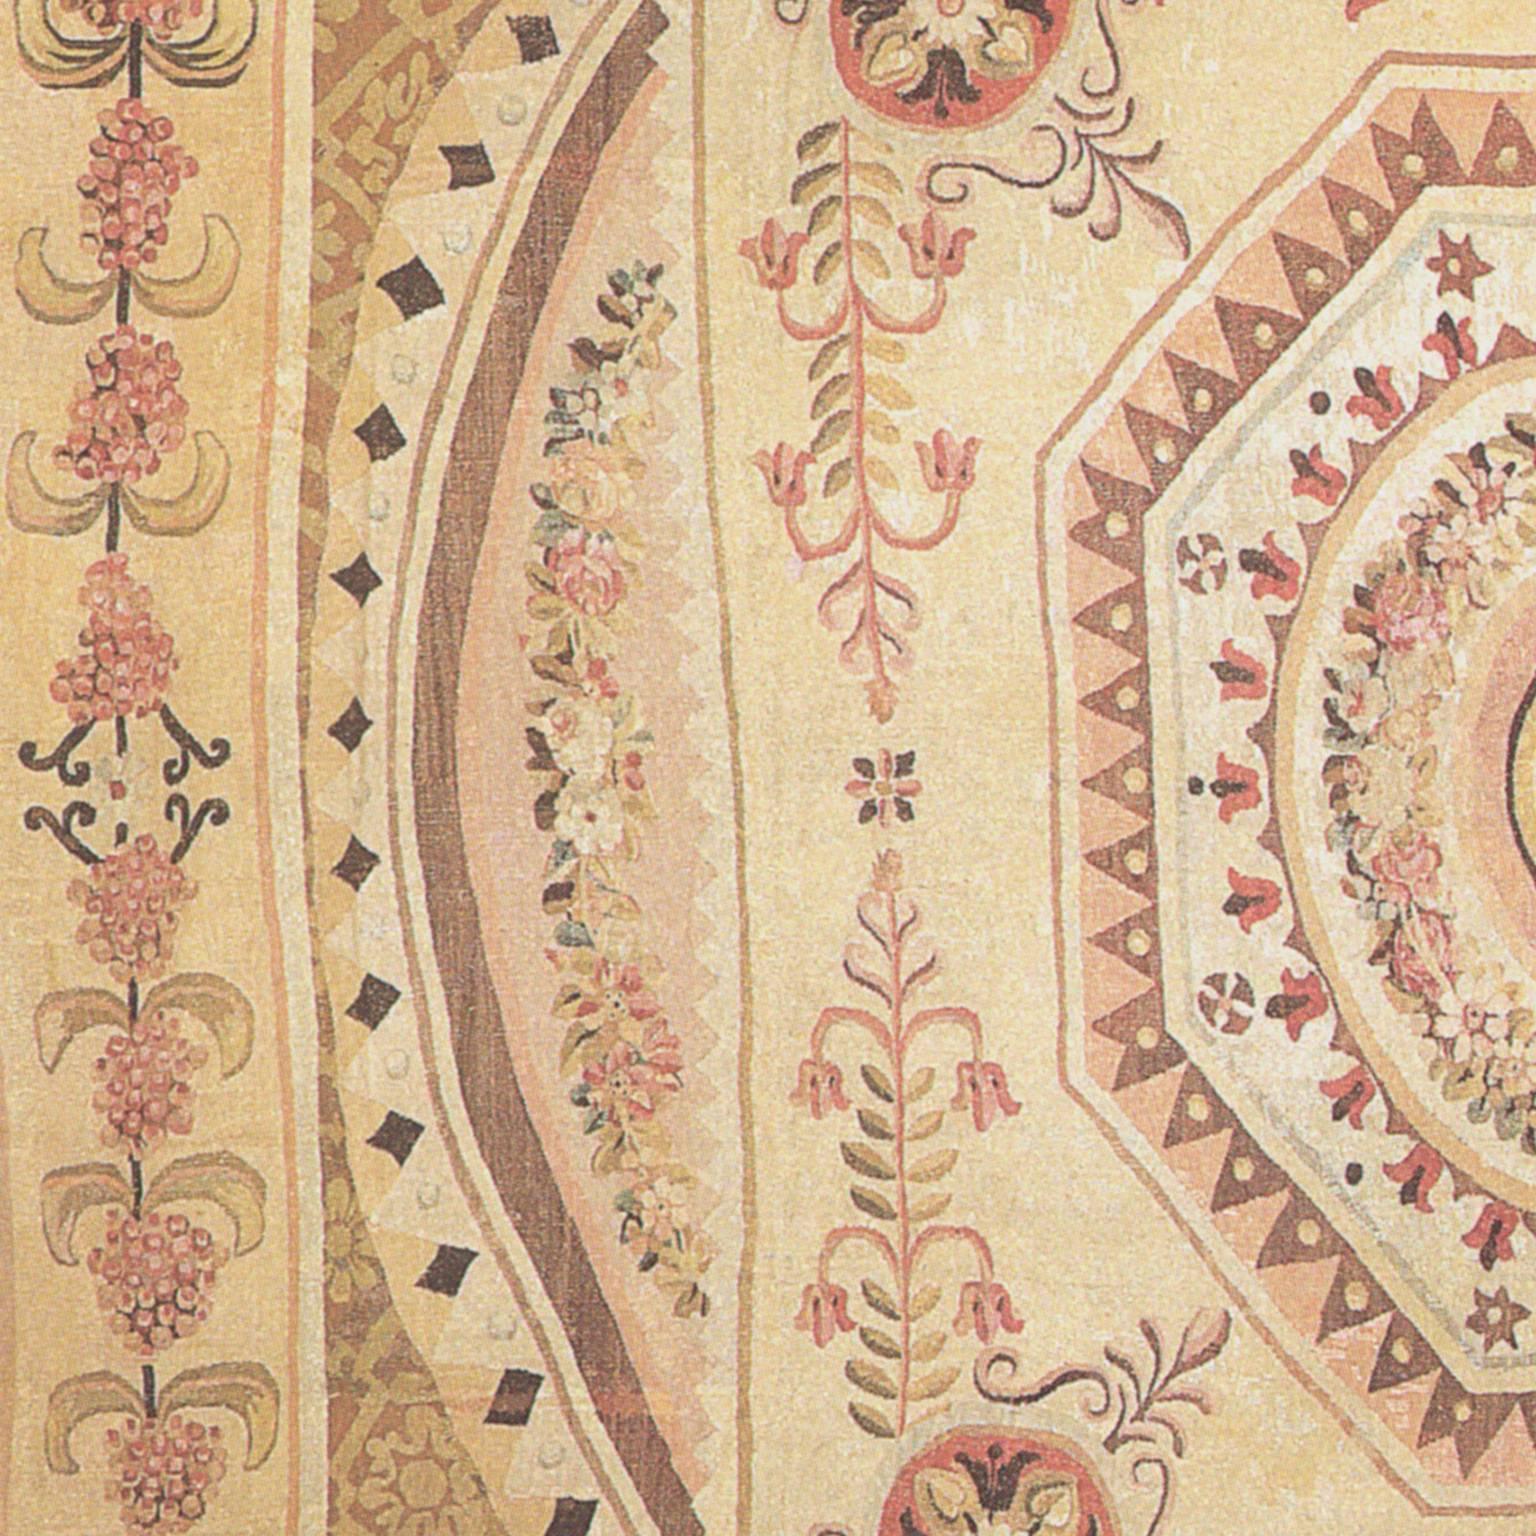 19th Century French Aubusson Rug, 1800